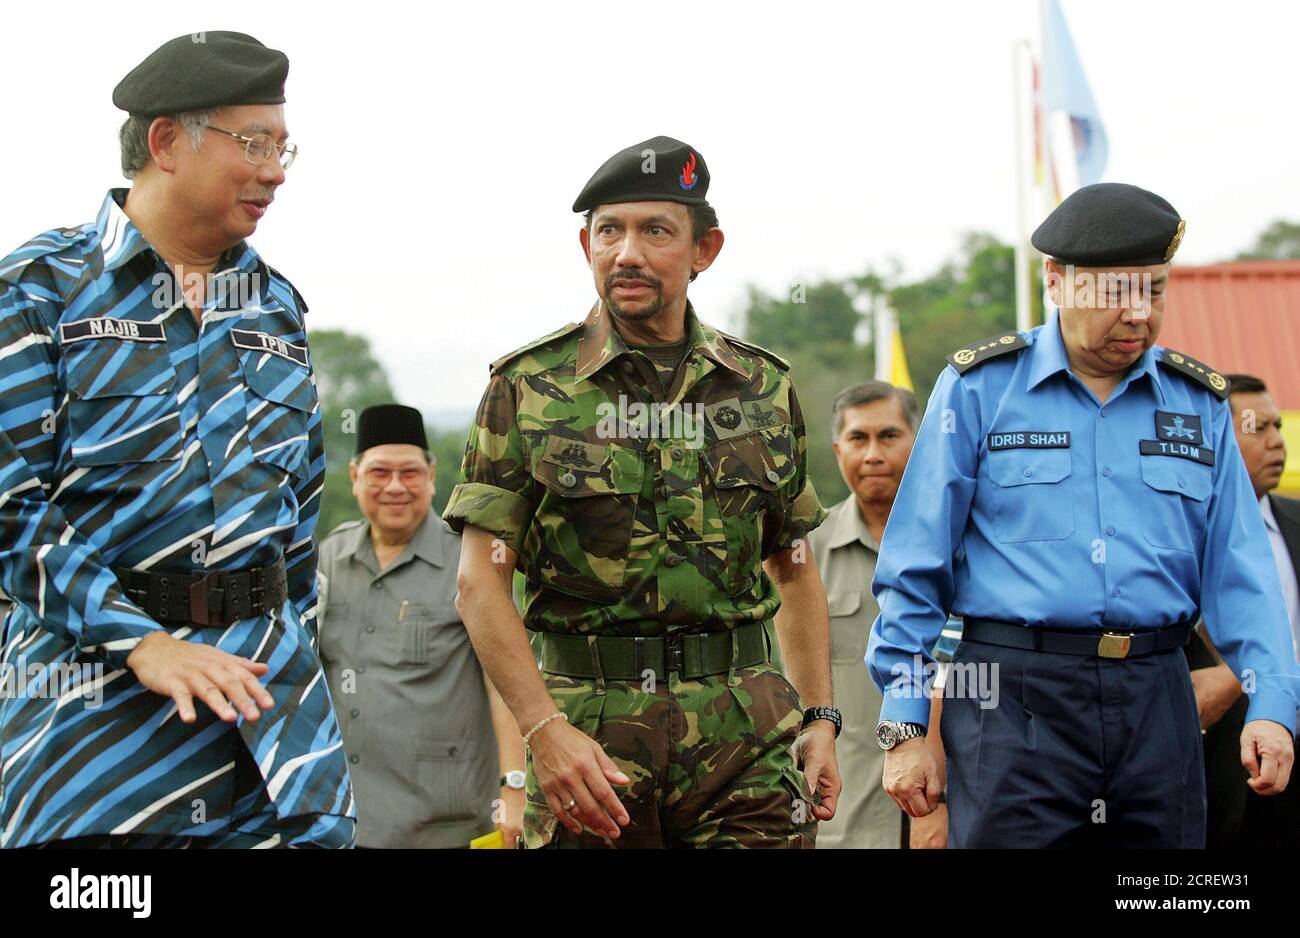 Visiting Sultan of Brunei Hassanal Bolkiah (C) is accompanied by Malaysian Deputy Prime Minister Najib Razak (L) and the Sultan of Selangor Idris Shah during Bolkiah's visit to a training camp in Semenyih, outside Kuala Lumpur April 29, 2005. The Sultan arrived in Malaysia's capital of Kuala Lumpur on Wednesday for a four-day state visit on the invitation of Malaysia's King. REUTERS/Bazuki Muhammad  BM/MK Stock Photo